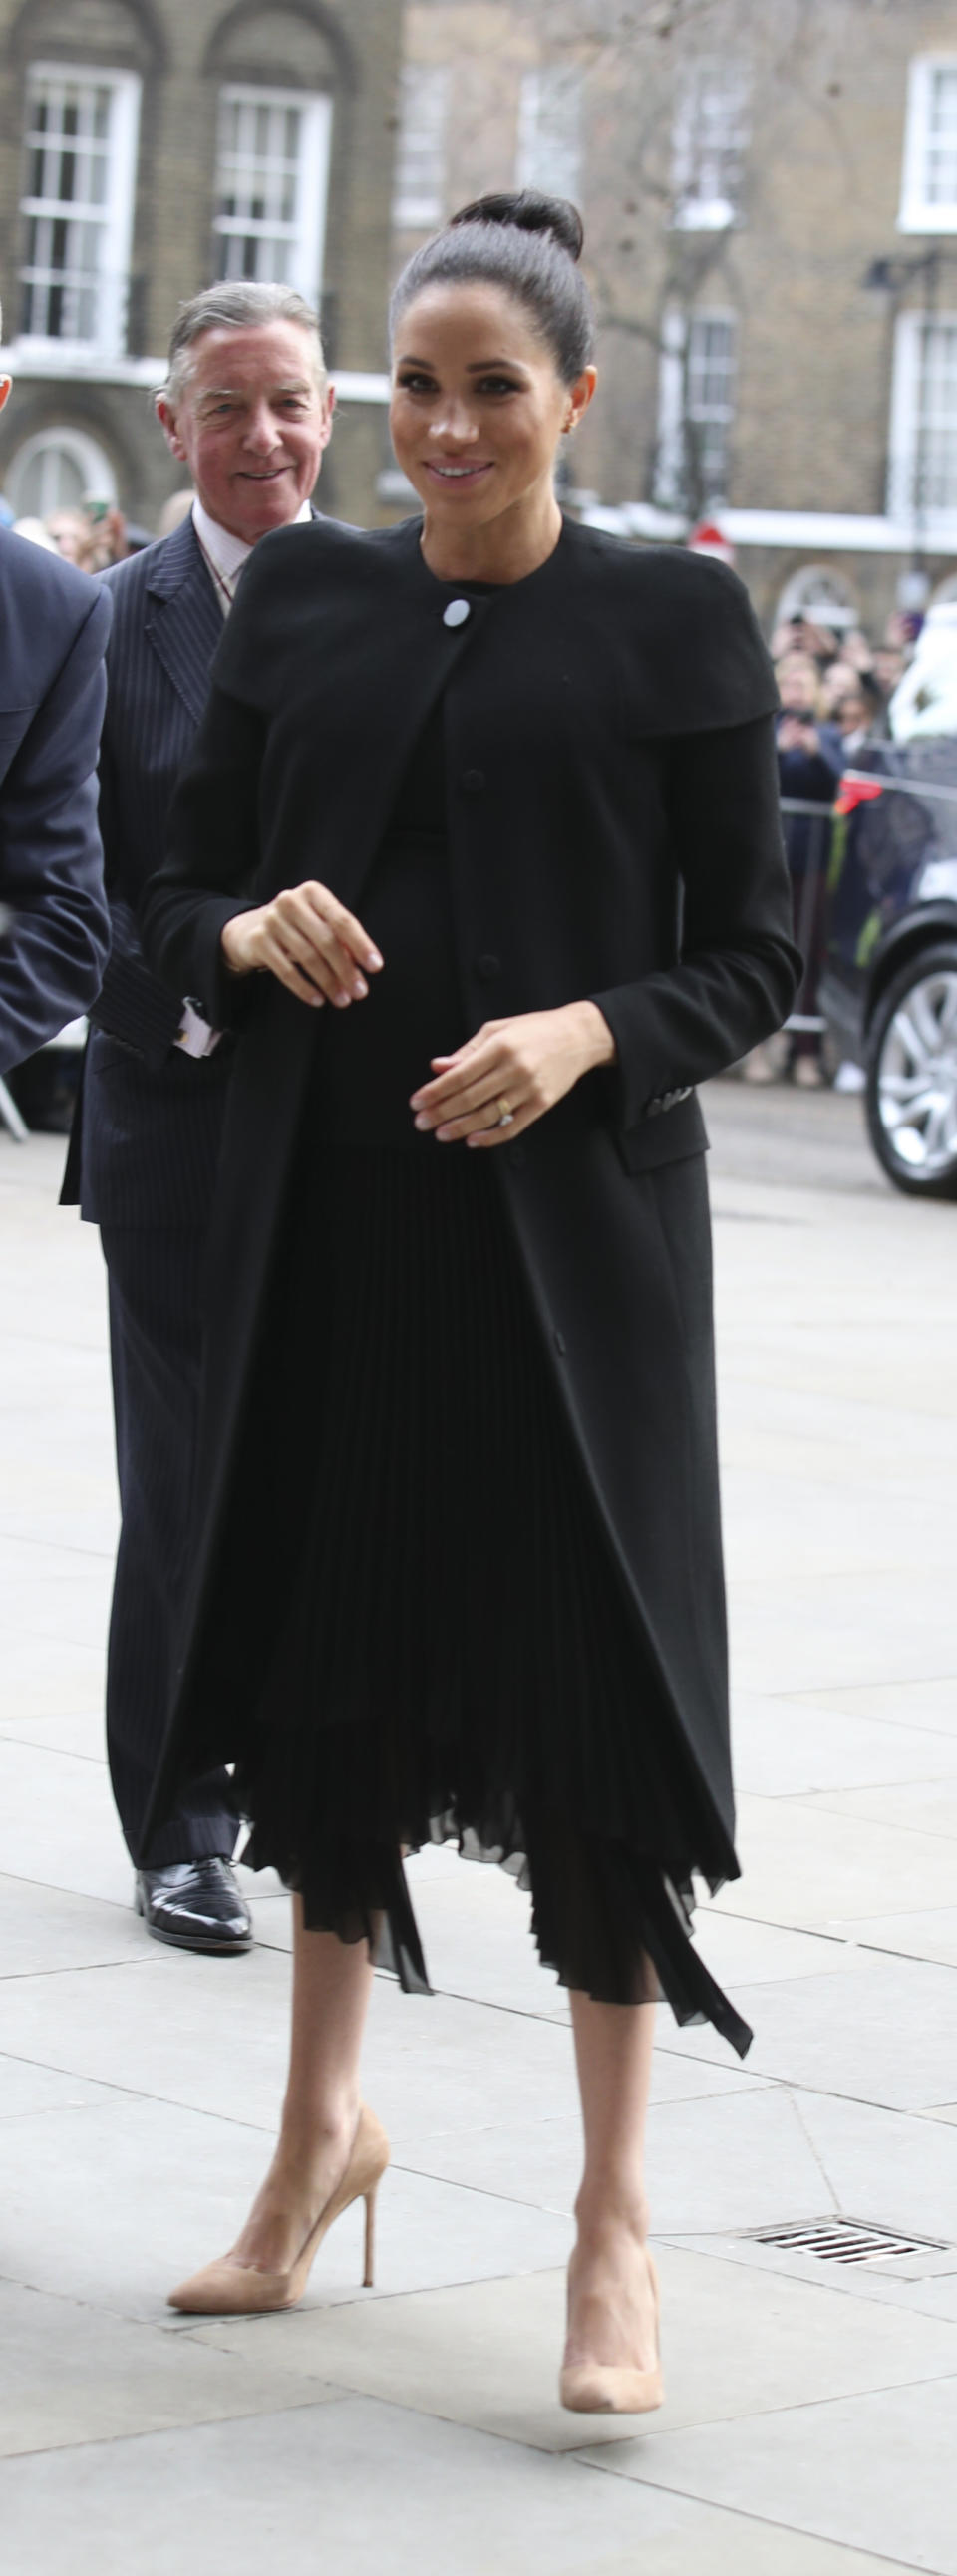 Meghan wore an all black outfit with a sleek topknot [Photo: Getty]